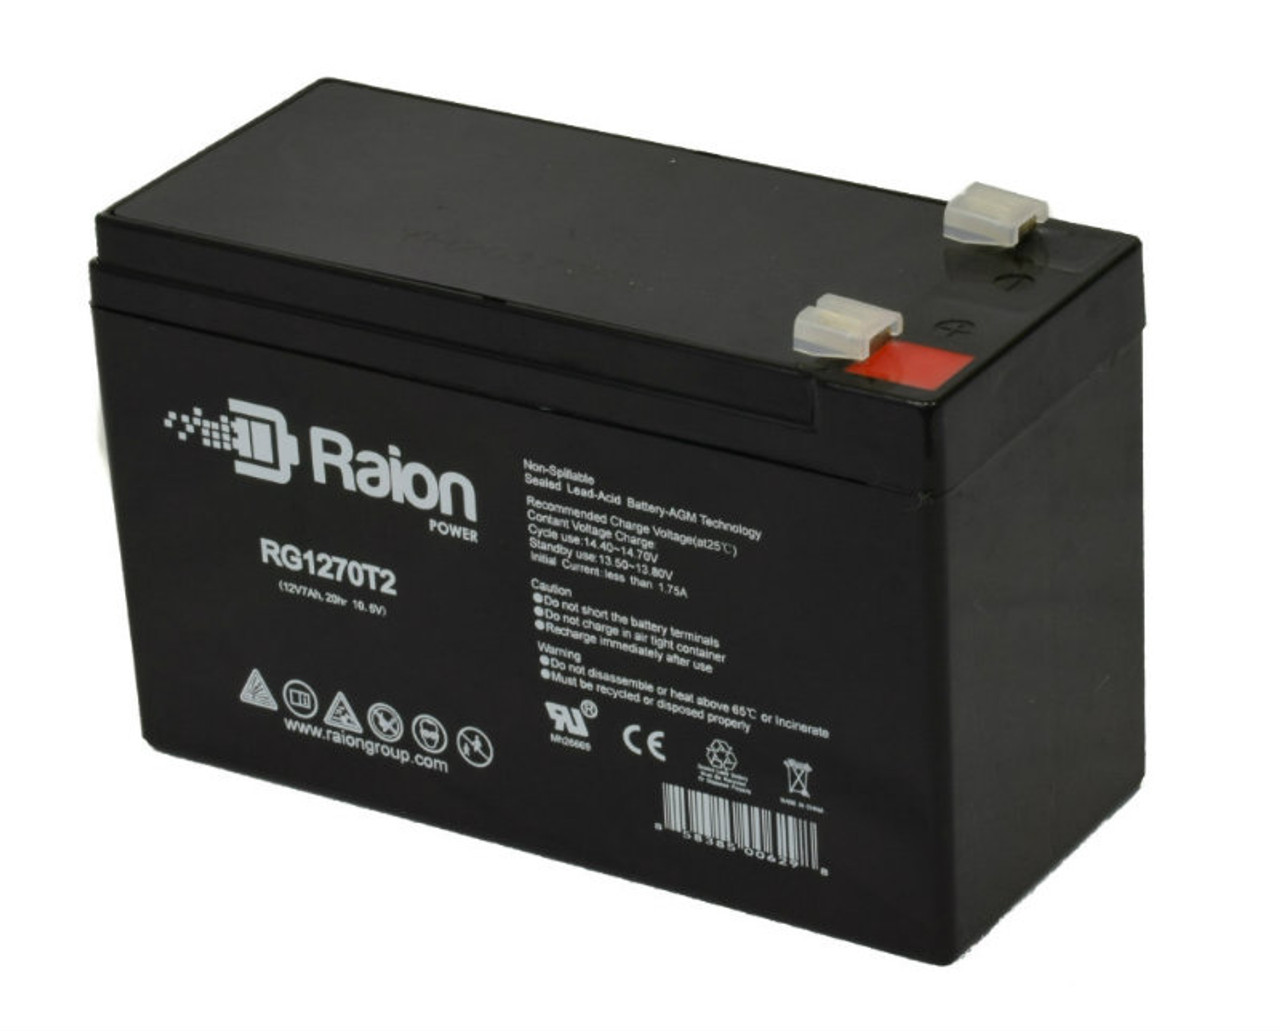 Raion Power Replacement 12V 7Ah Battery for Cybex 629A Arc Trainer Fitness Equipment